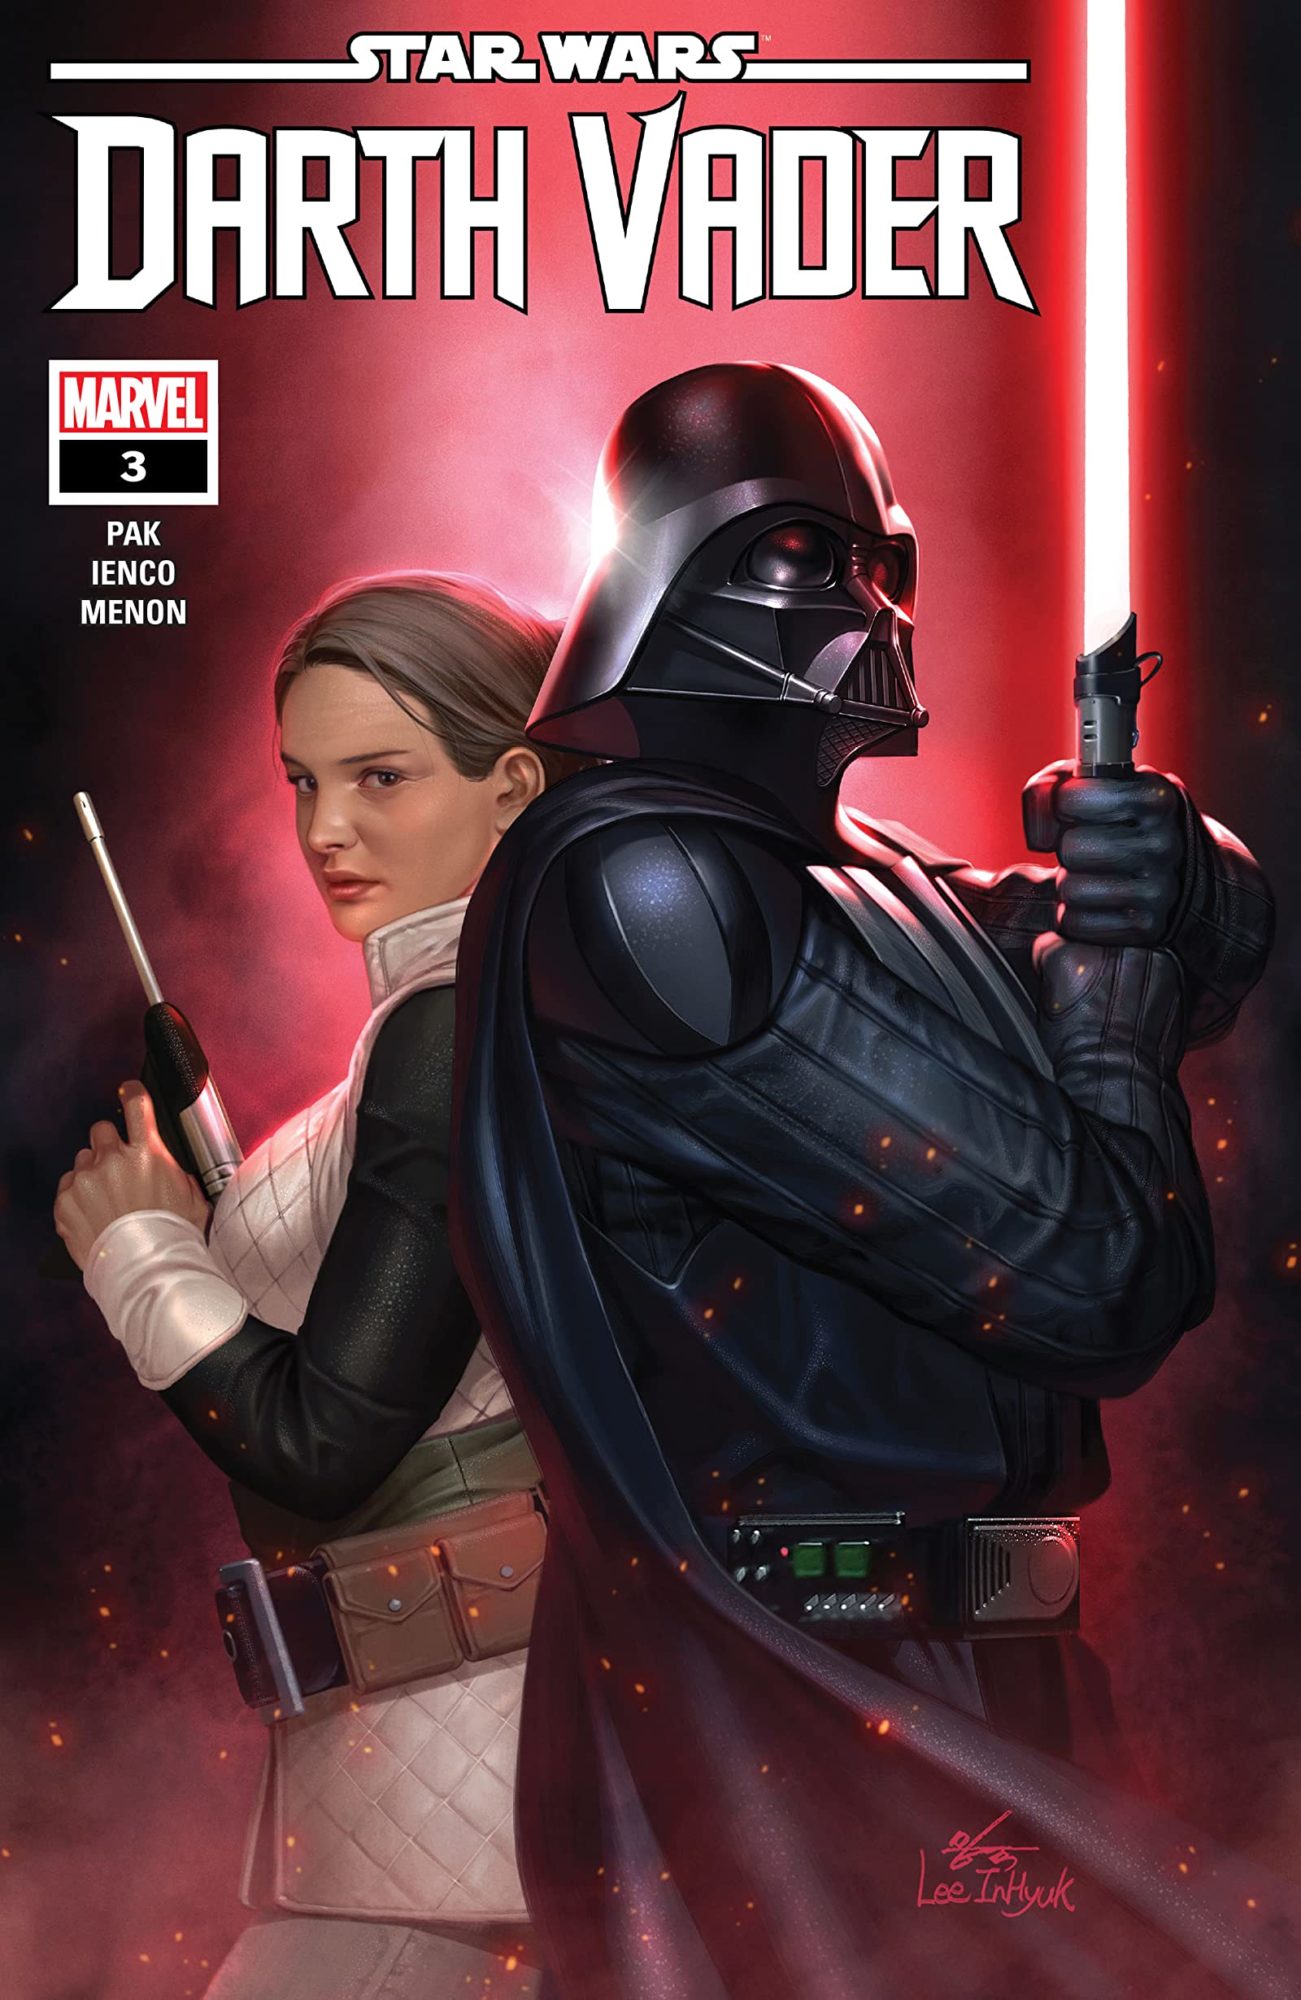 Darth Vader issue 3 cover